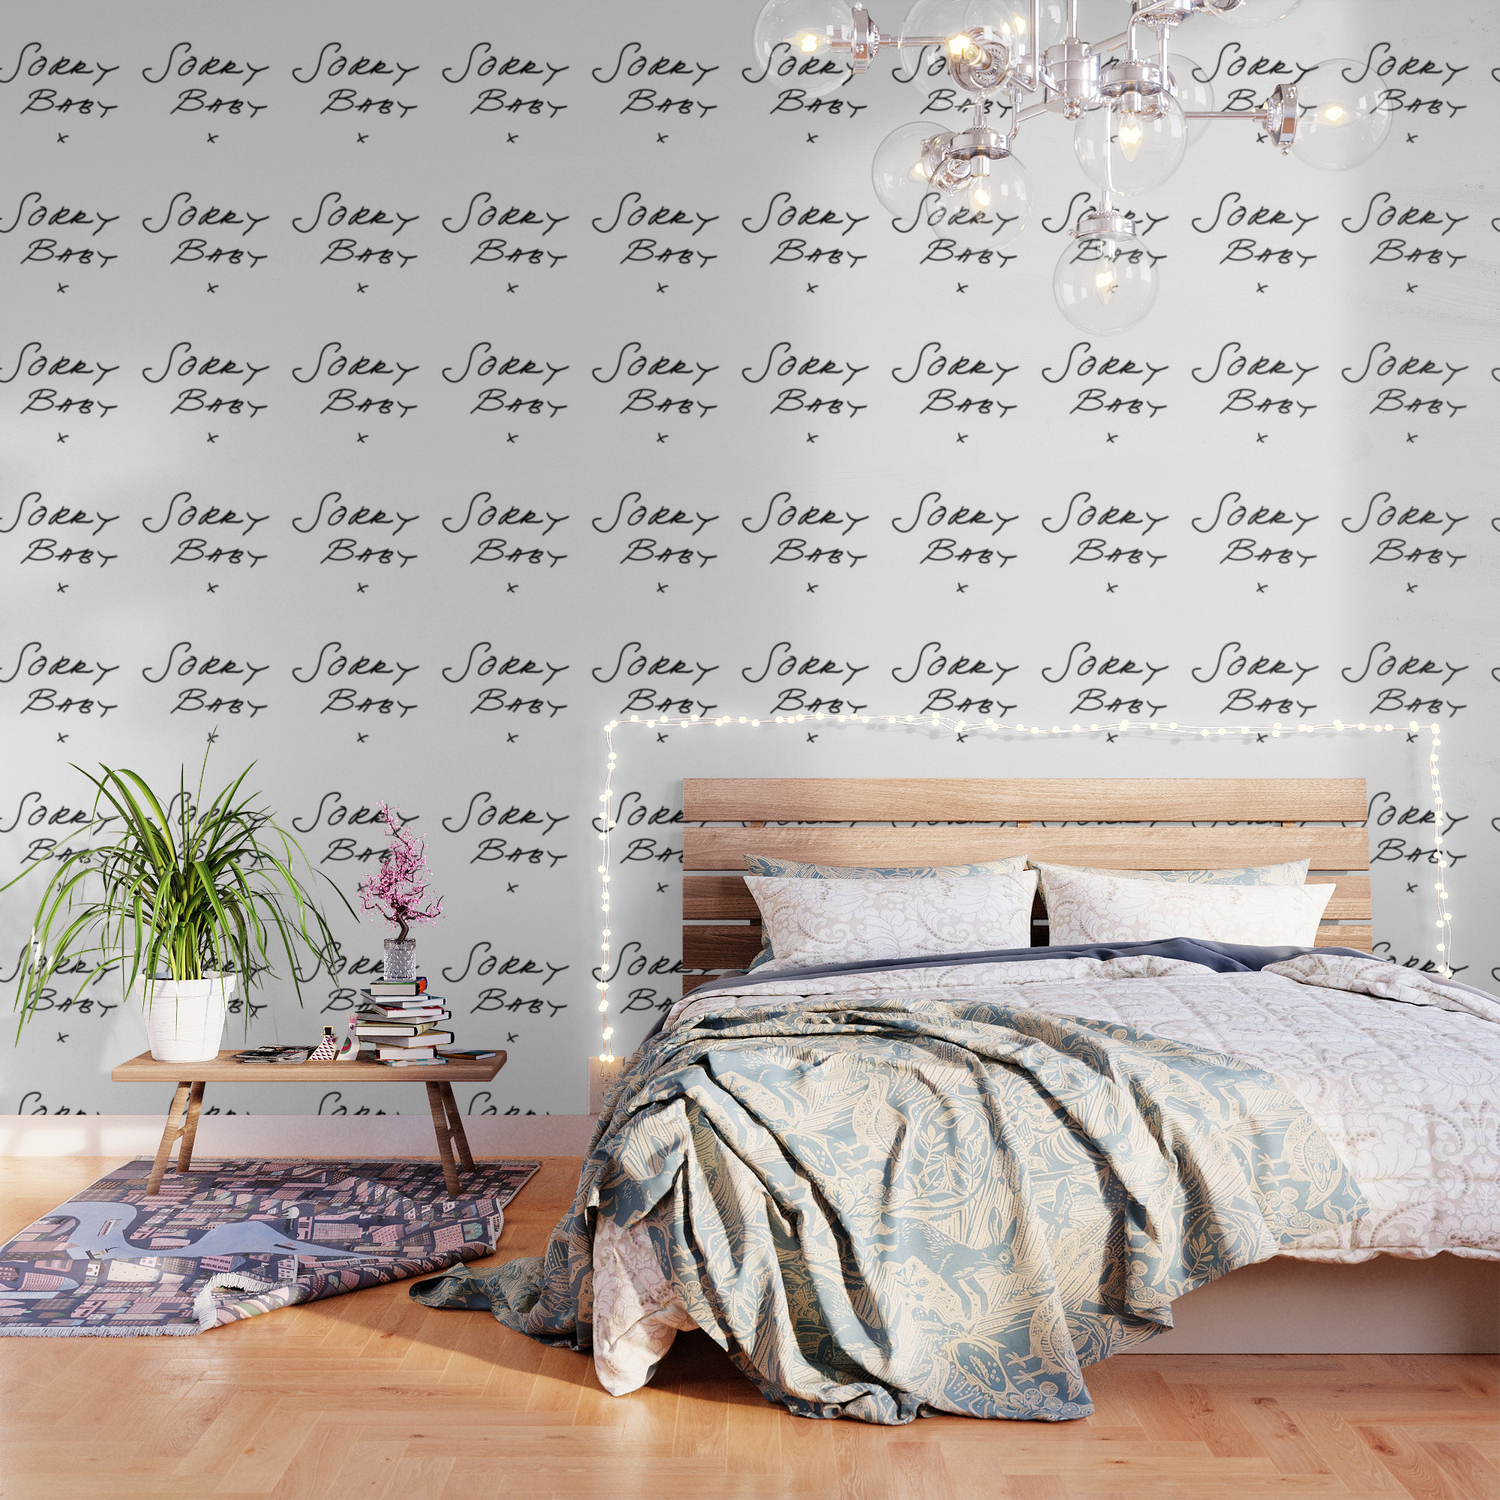 Killing Eve - Sorry Baby -quote-Villanelle Wallpaper by Creative Stance |  Society6